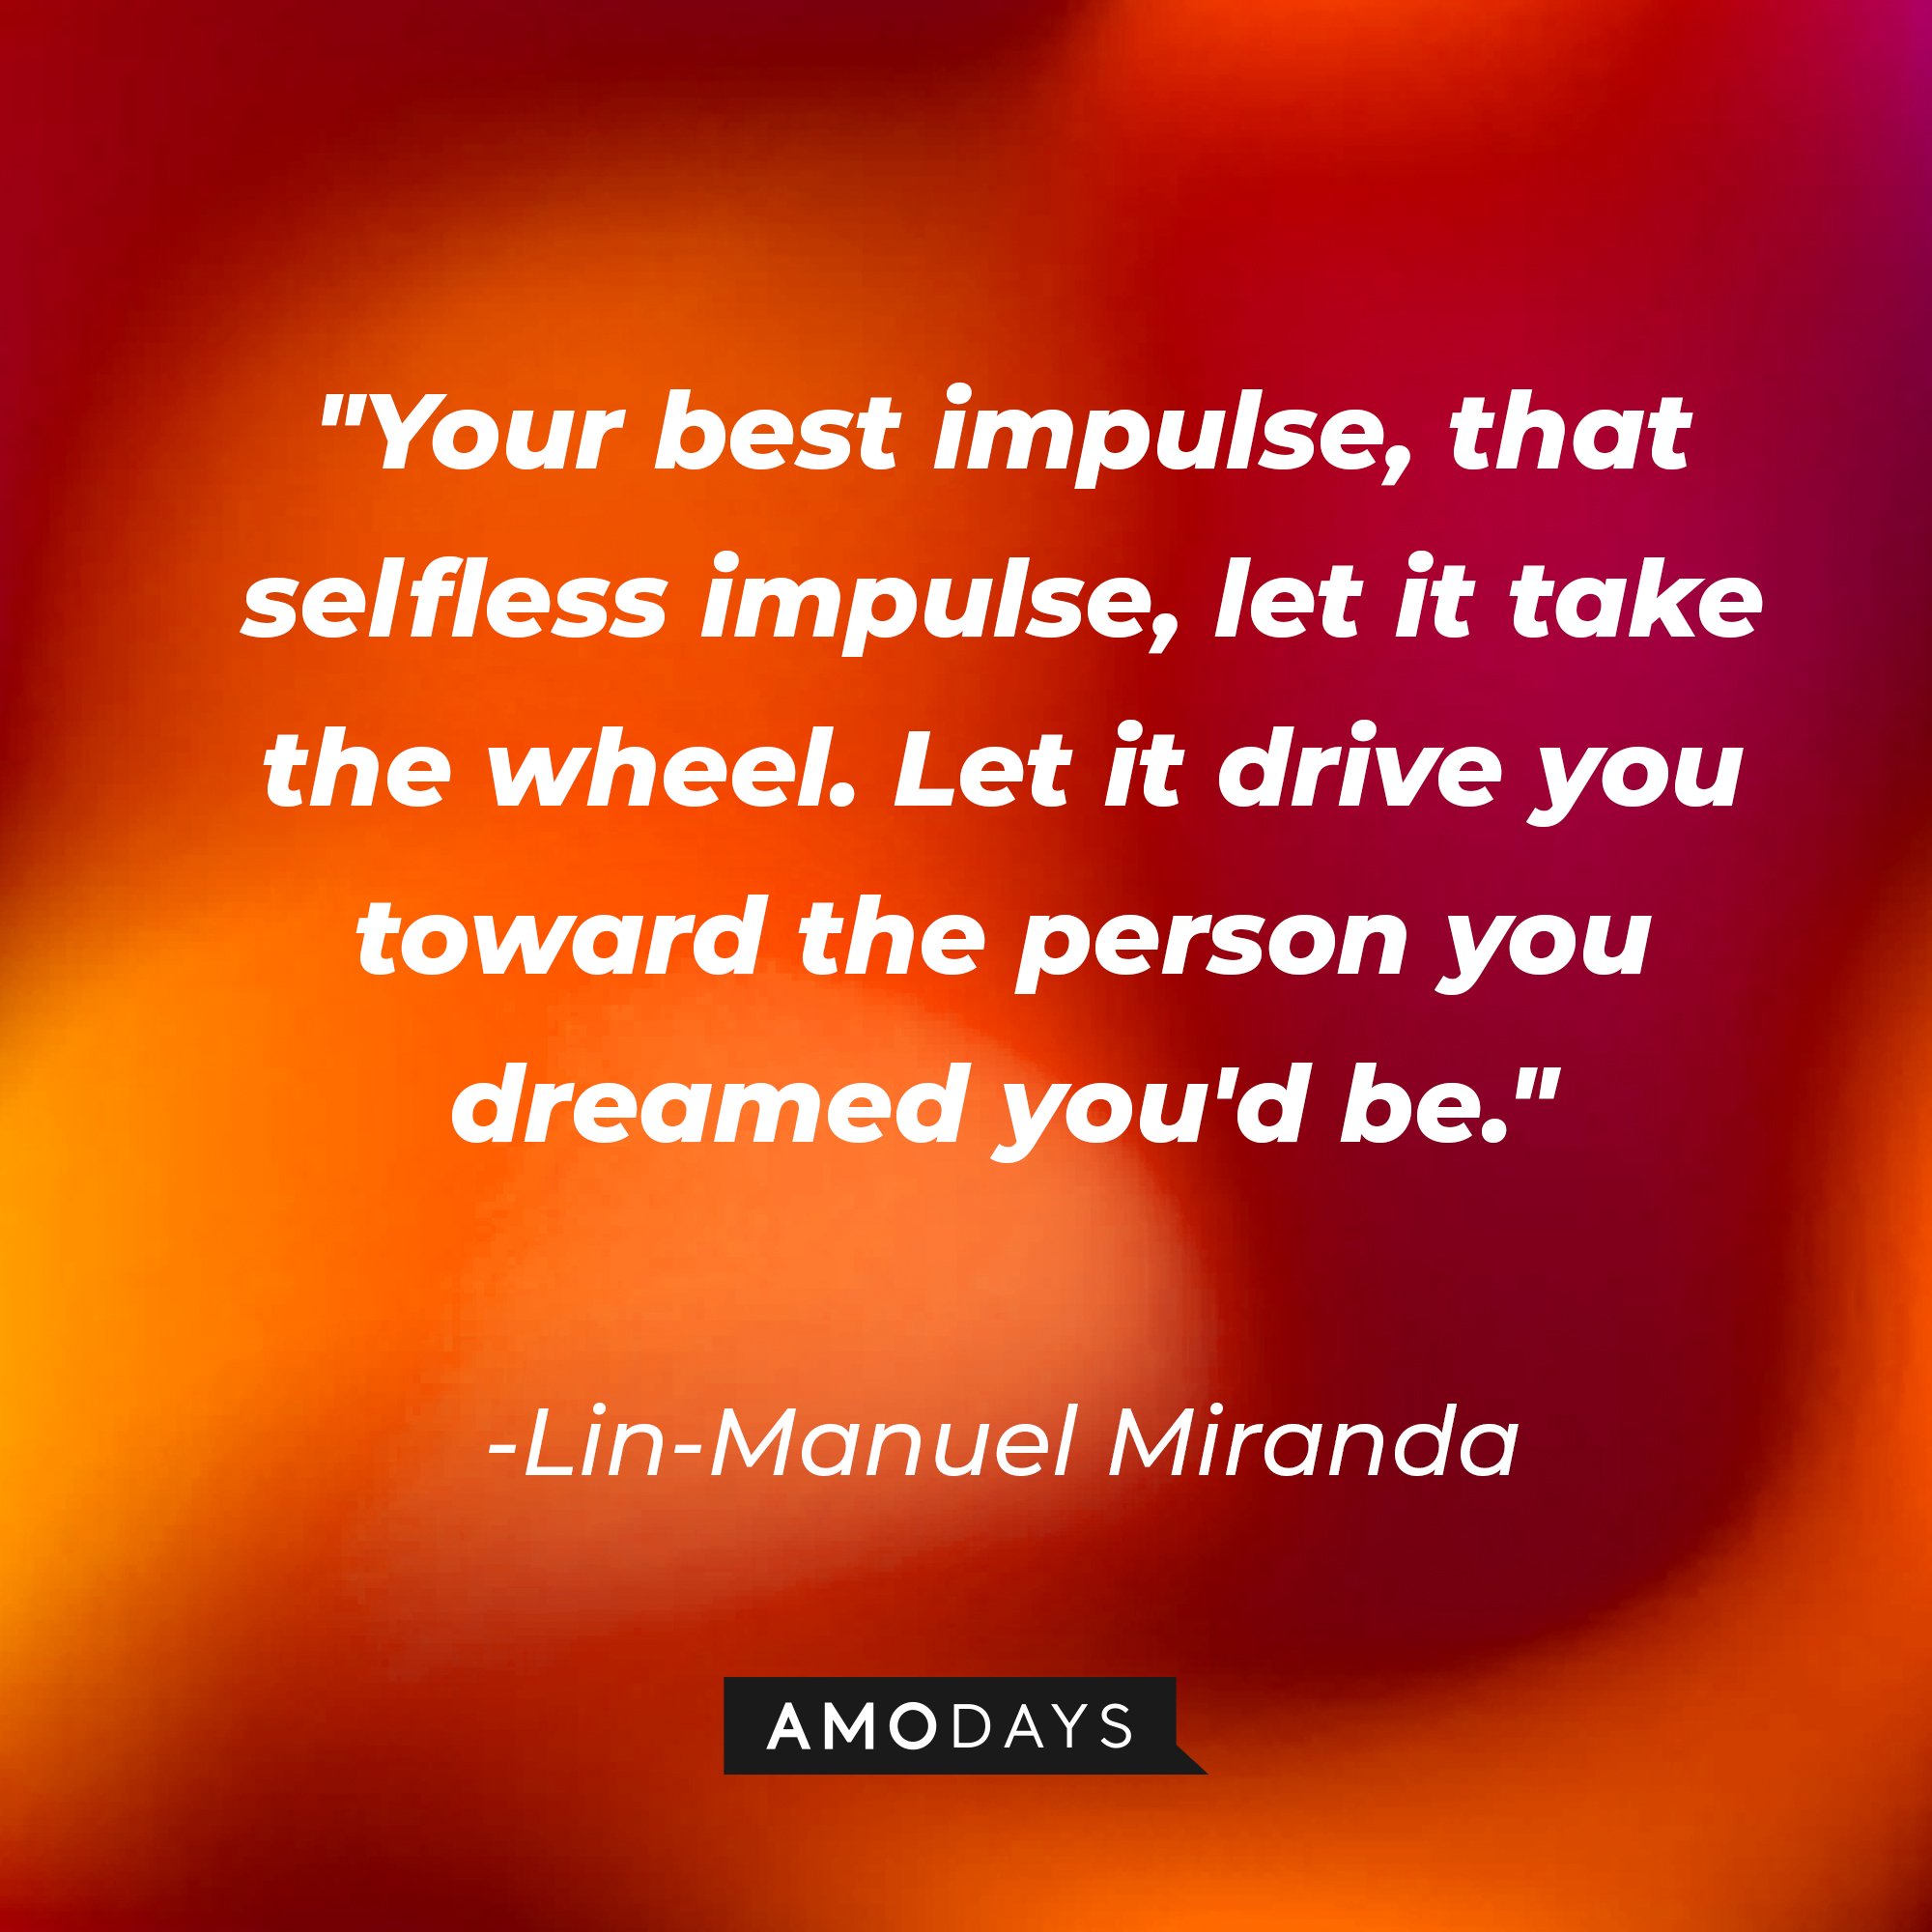 Lin-Manuel Miranda's quote: "Your best impulse, that selfless impulse, let it take the wheel. Let it drive you toward the person you dreamed you'd be." | Image: AmoDays